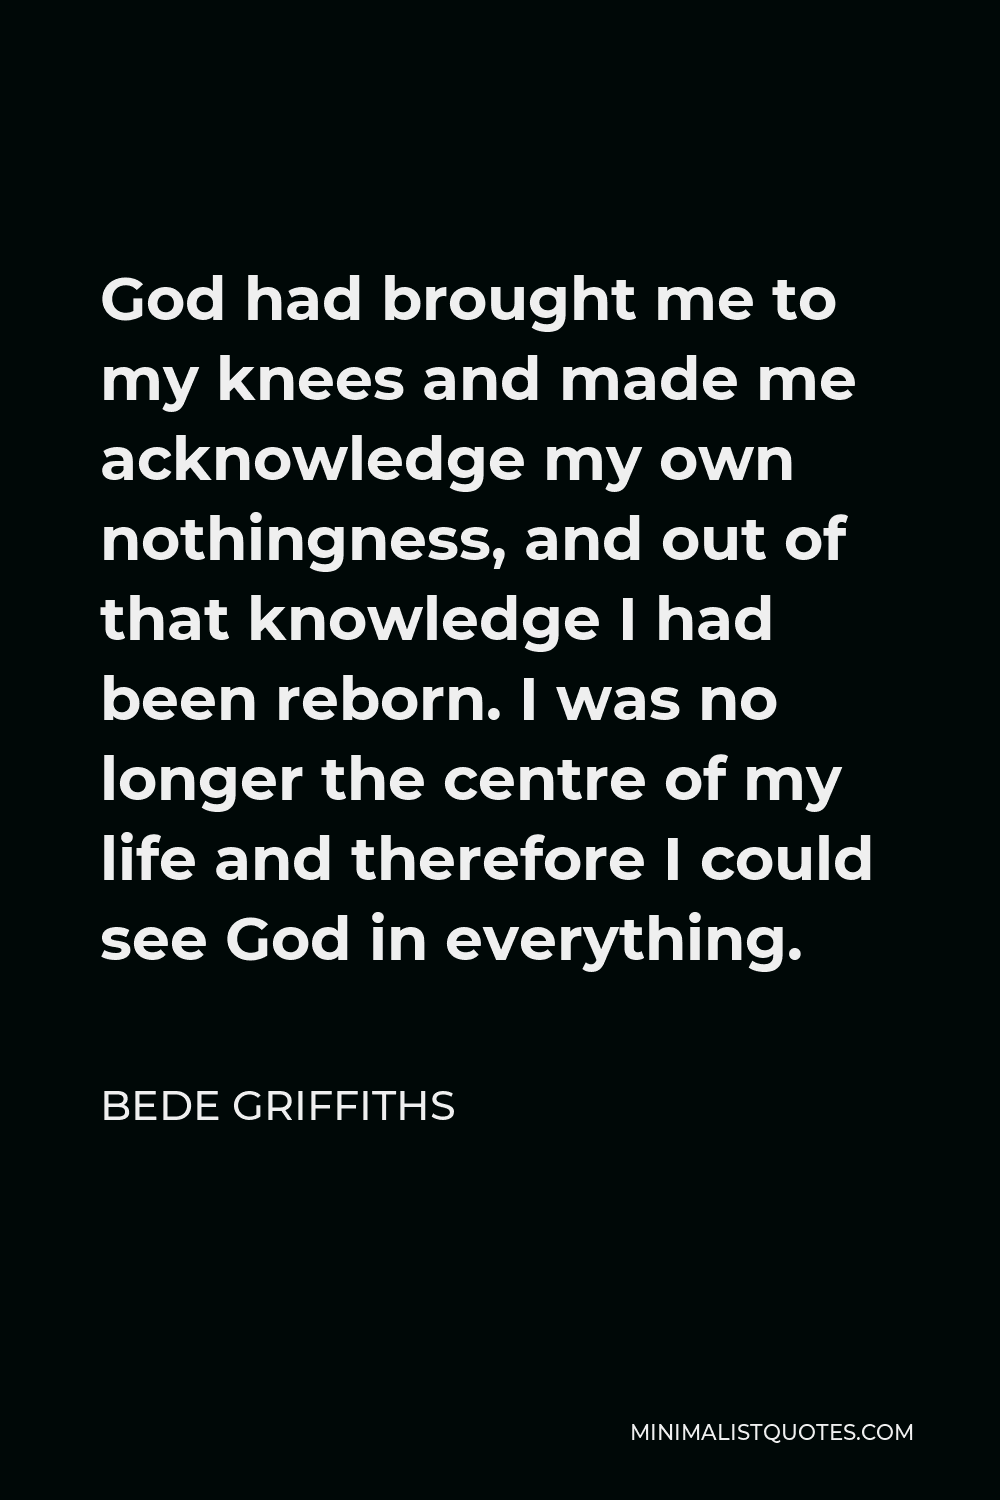 Bede Griffiths Quote - God had brought me to my knees and made me acknowledge my own nothingness, and out of that knowledge I had been reborn. I was no longer the centre of my life and therefore I could see God in everything.